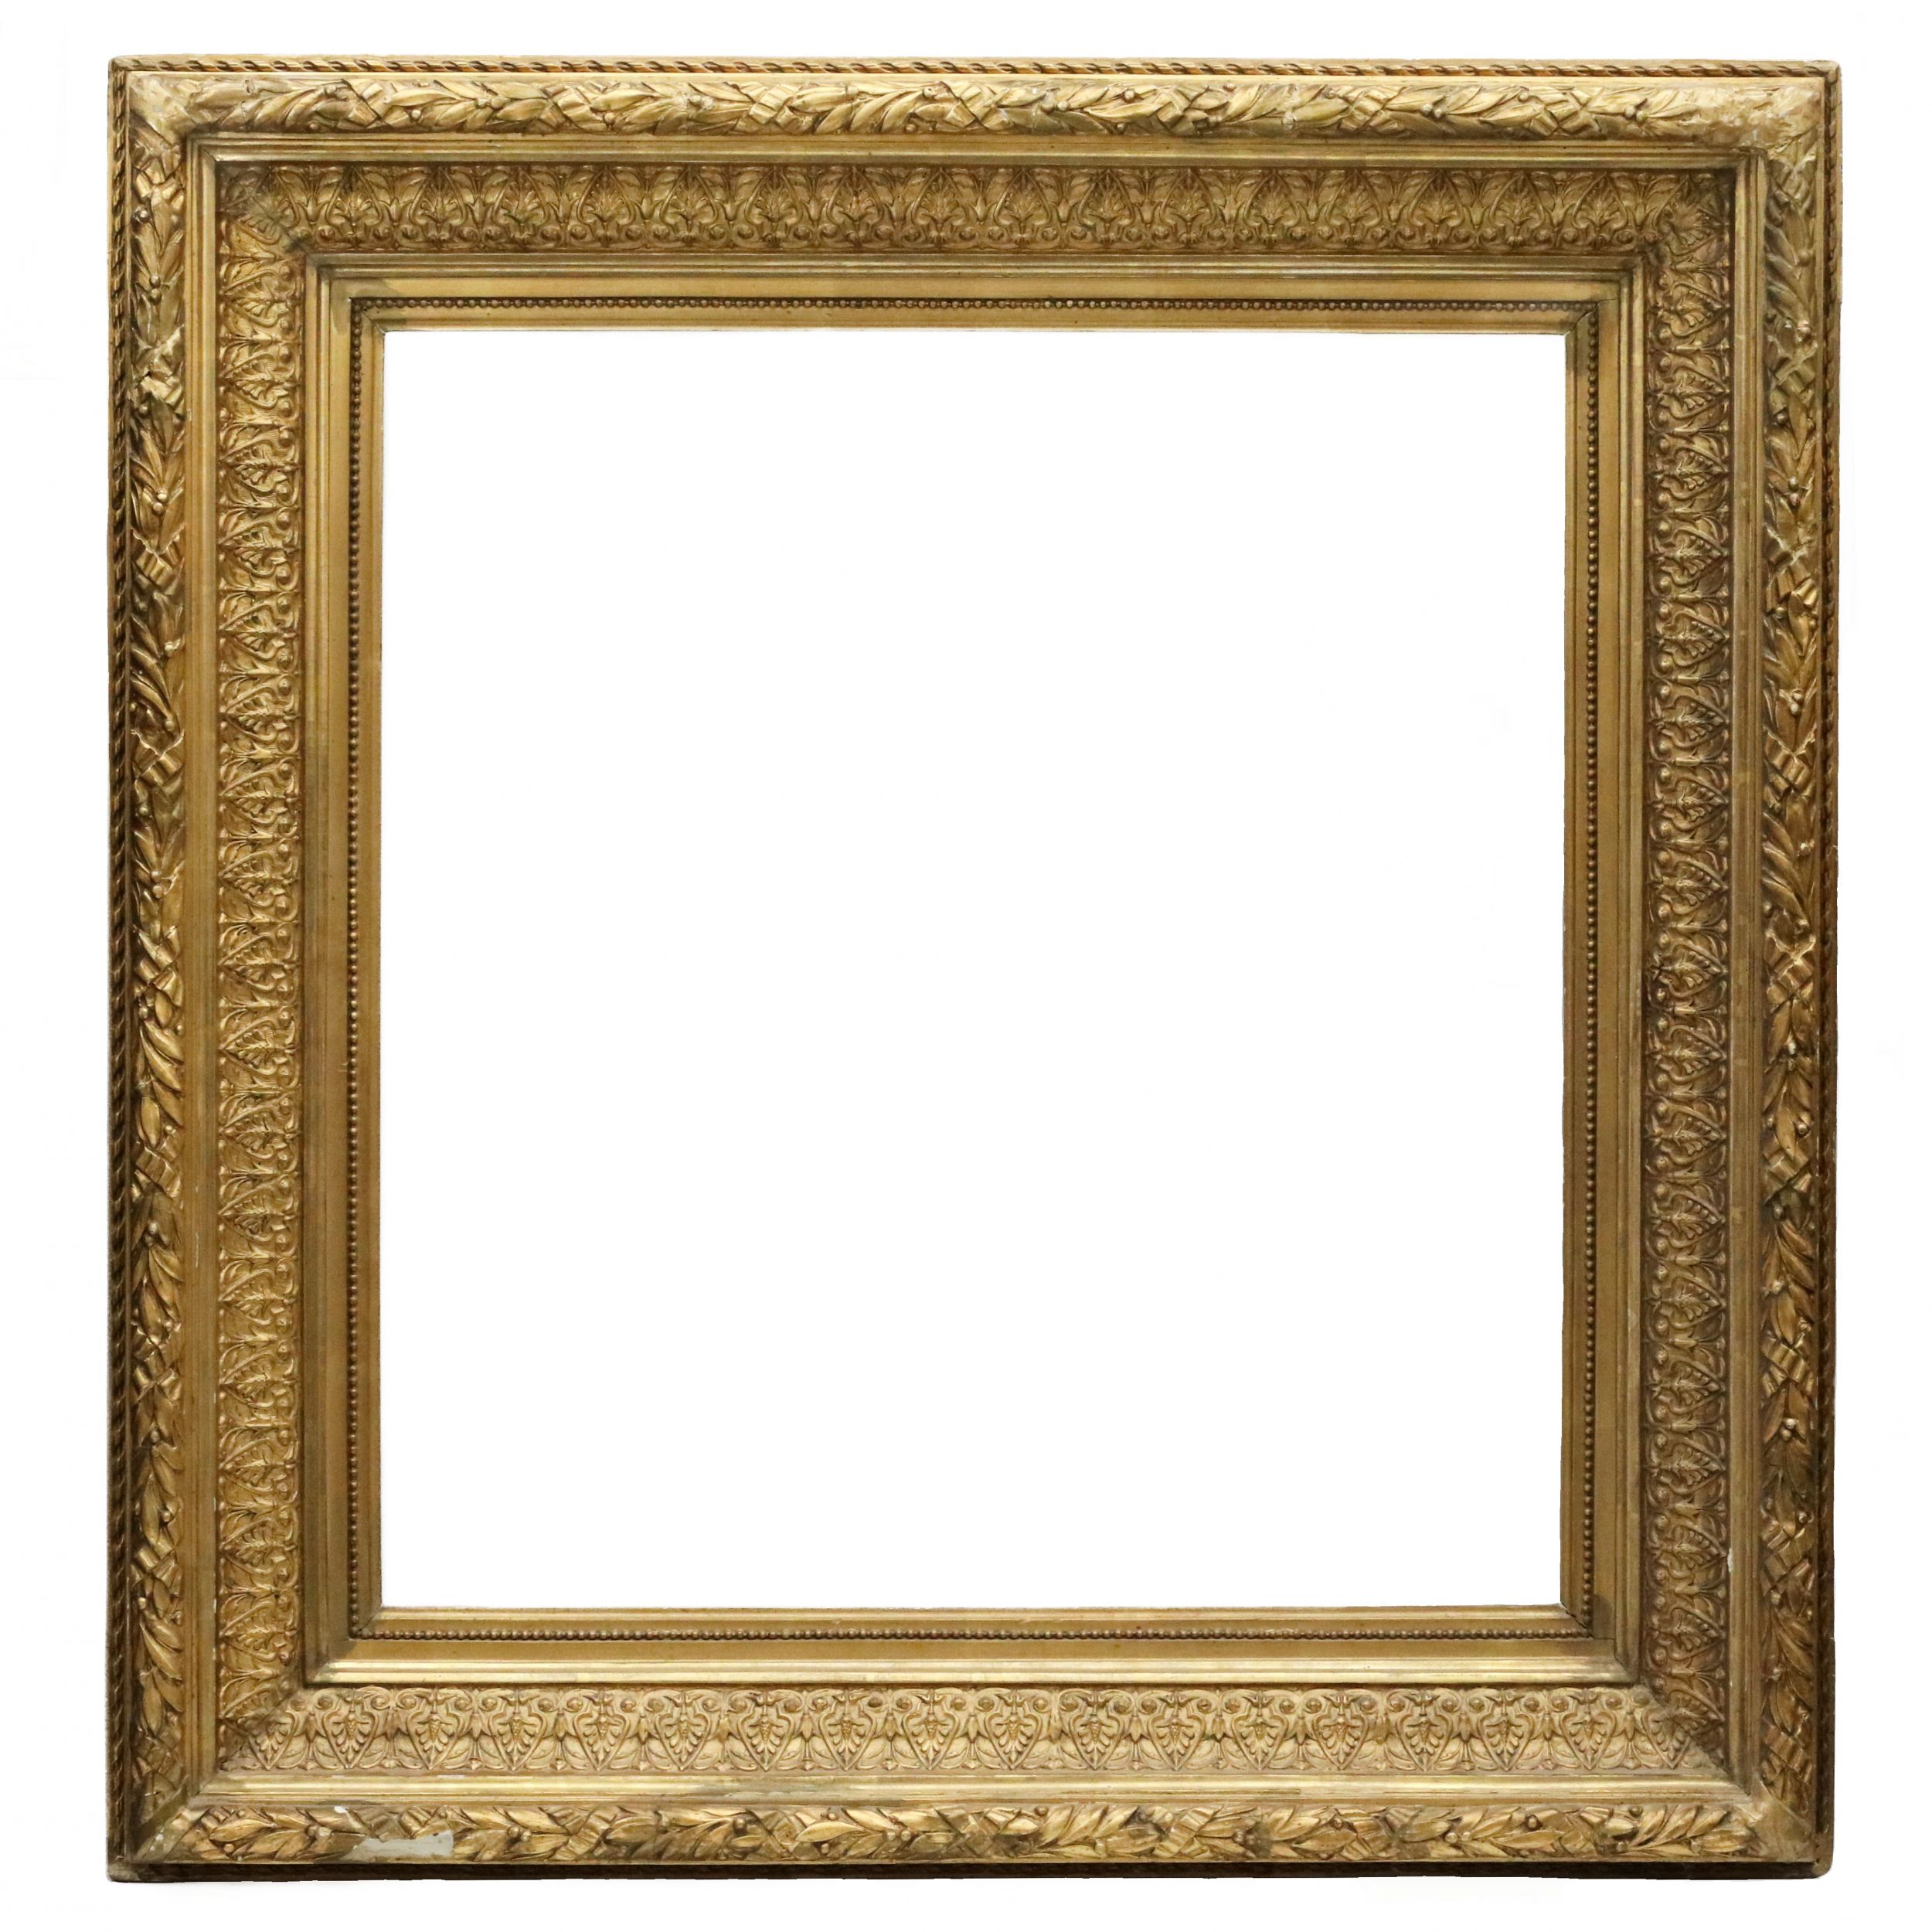 Expressive-wooden-frame-of-classical-style-with-accant-and-laurel-garland-19th-century-